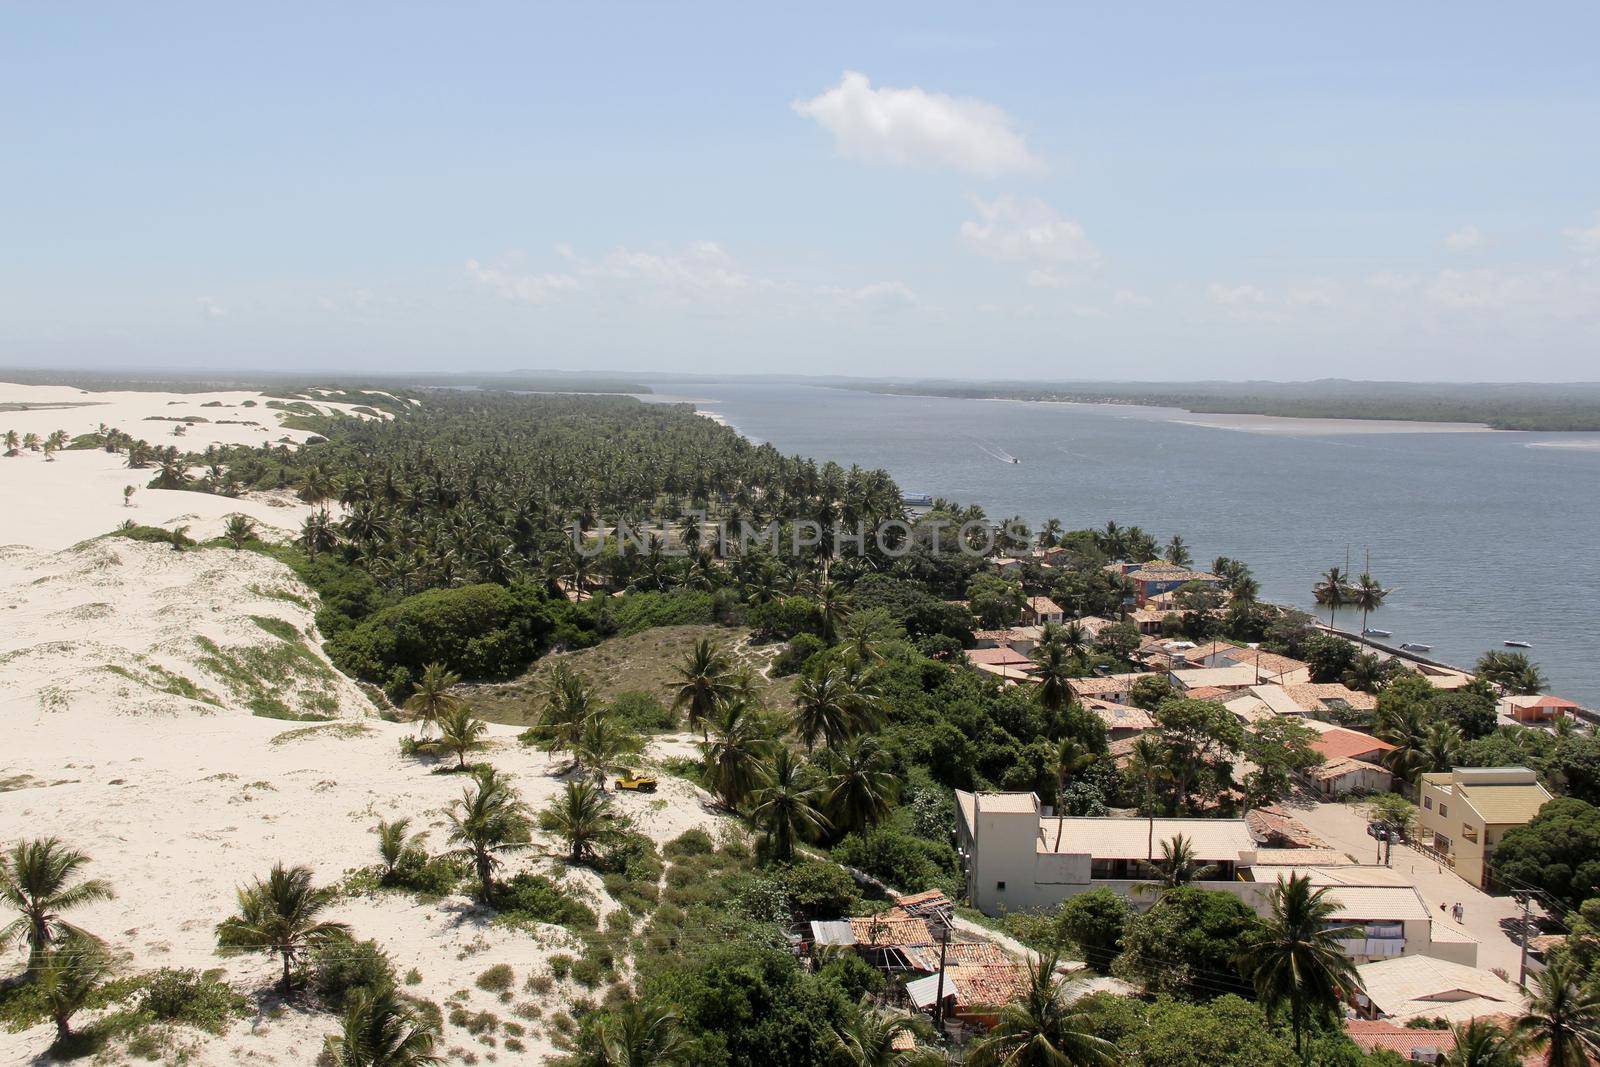 jandaira, bahia / brazil - december 24, 2013: aerial view of the sand dunes of Mangue-Seco, in the municipality of Jandaira.